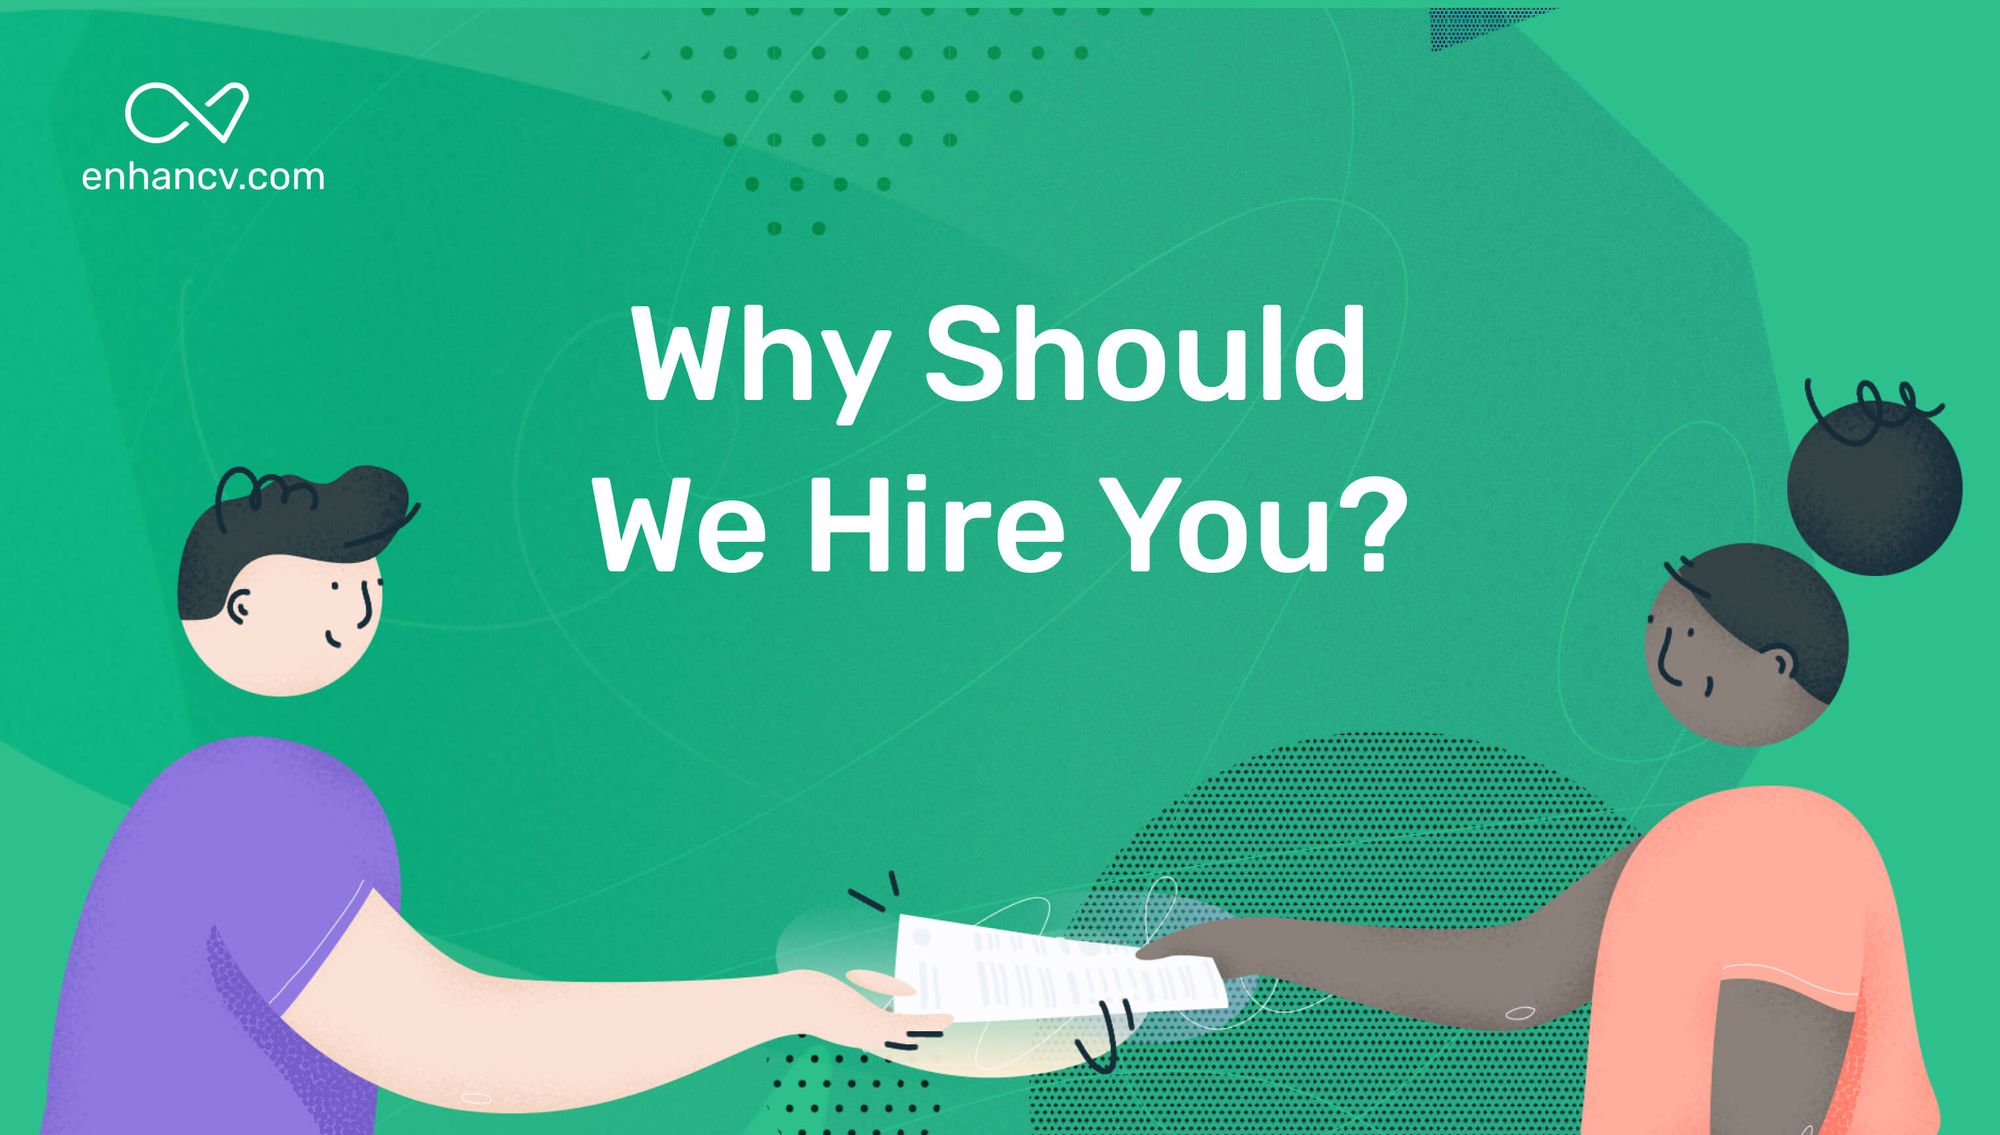 How to Answer "Why Should We Hire You?"